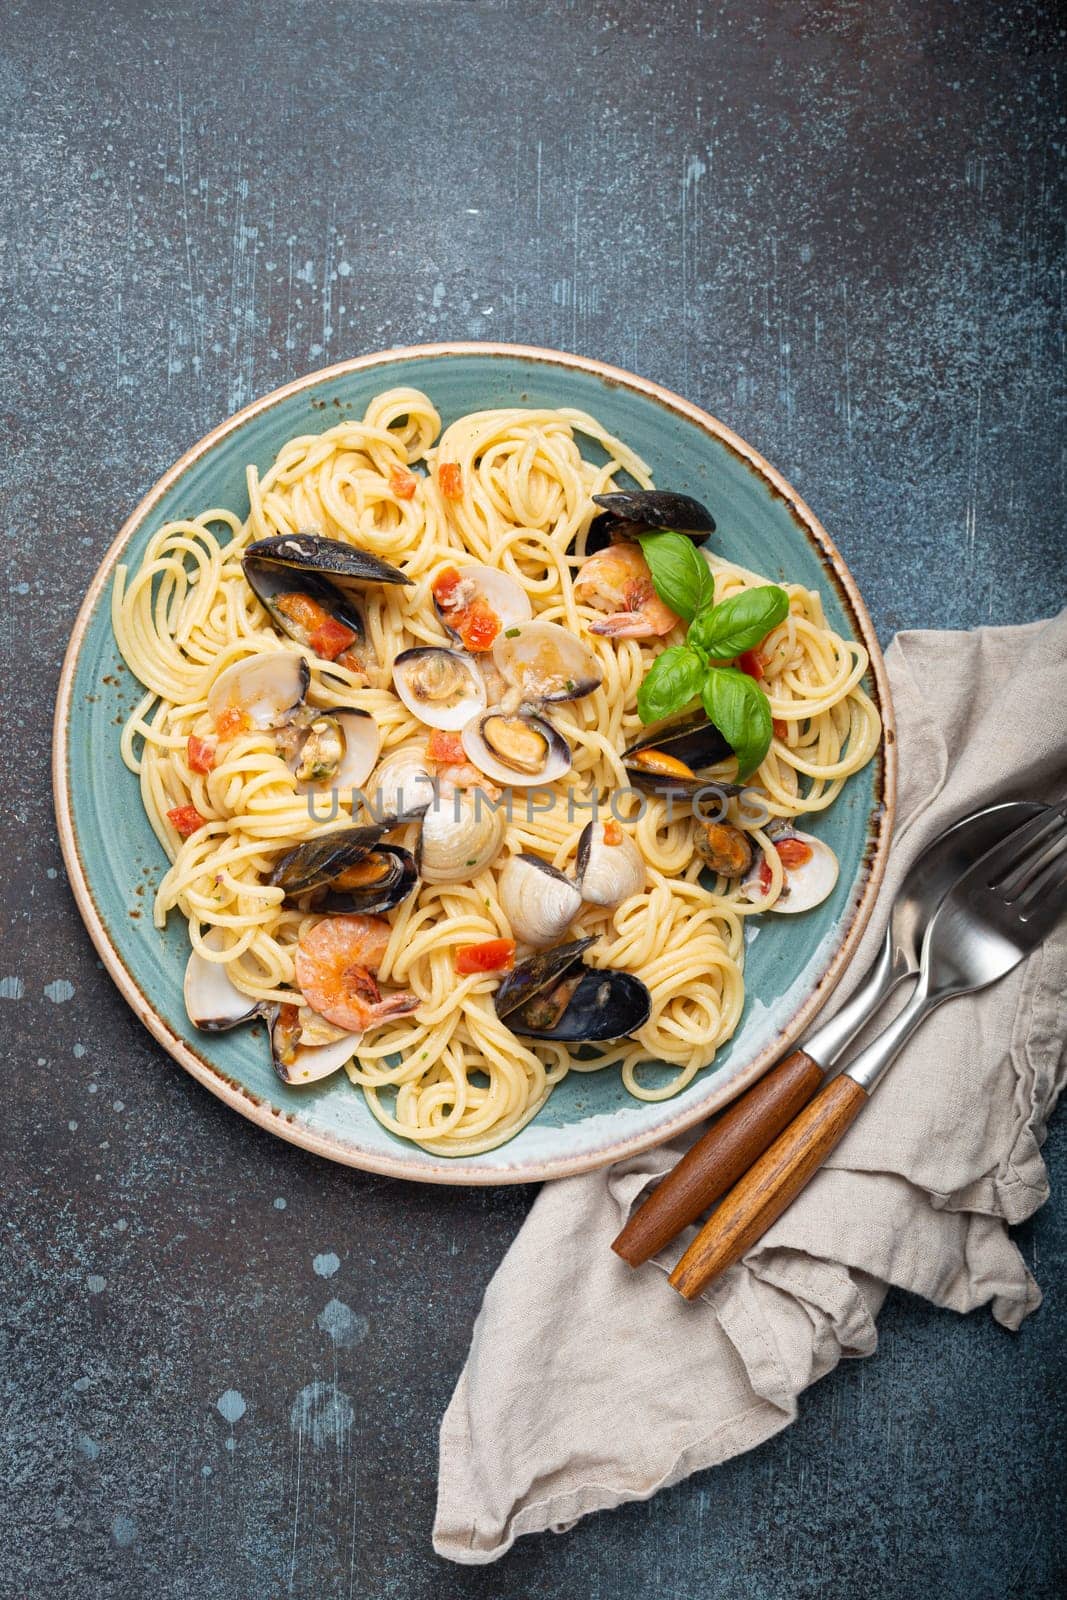 Italian seafood pasta spaghetti with mussels, shrimps, clams in tomato sauce with green basil on plate on rustic blue concrete background top view. Mediterranean cuisine by its_al_dente